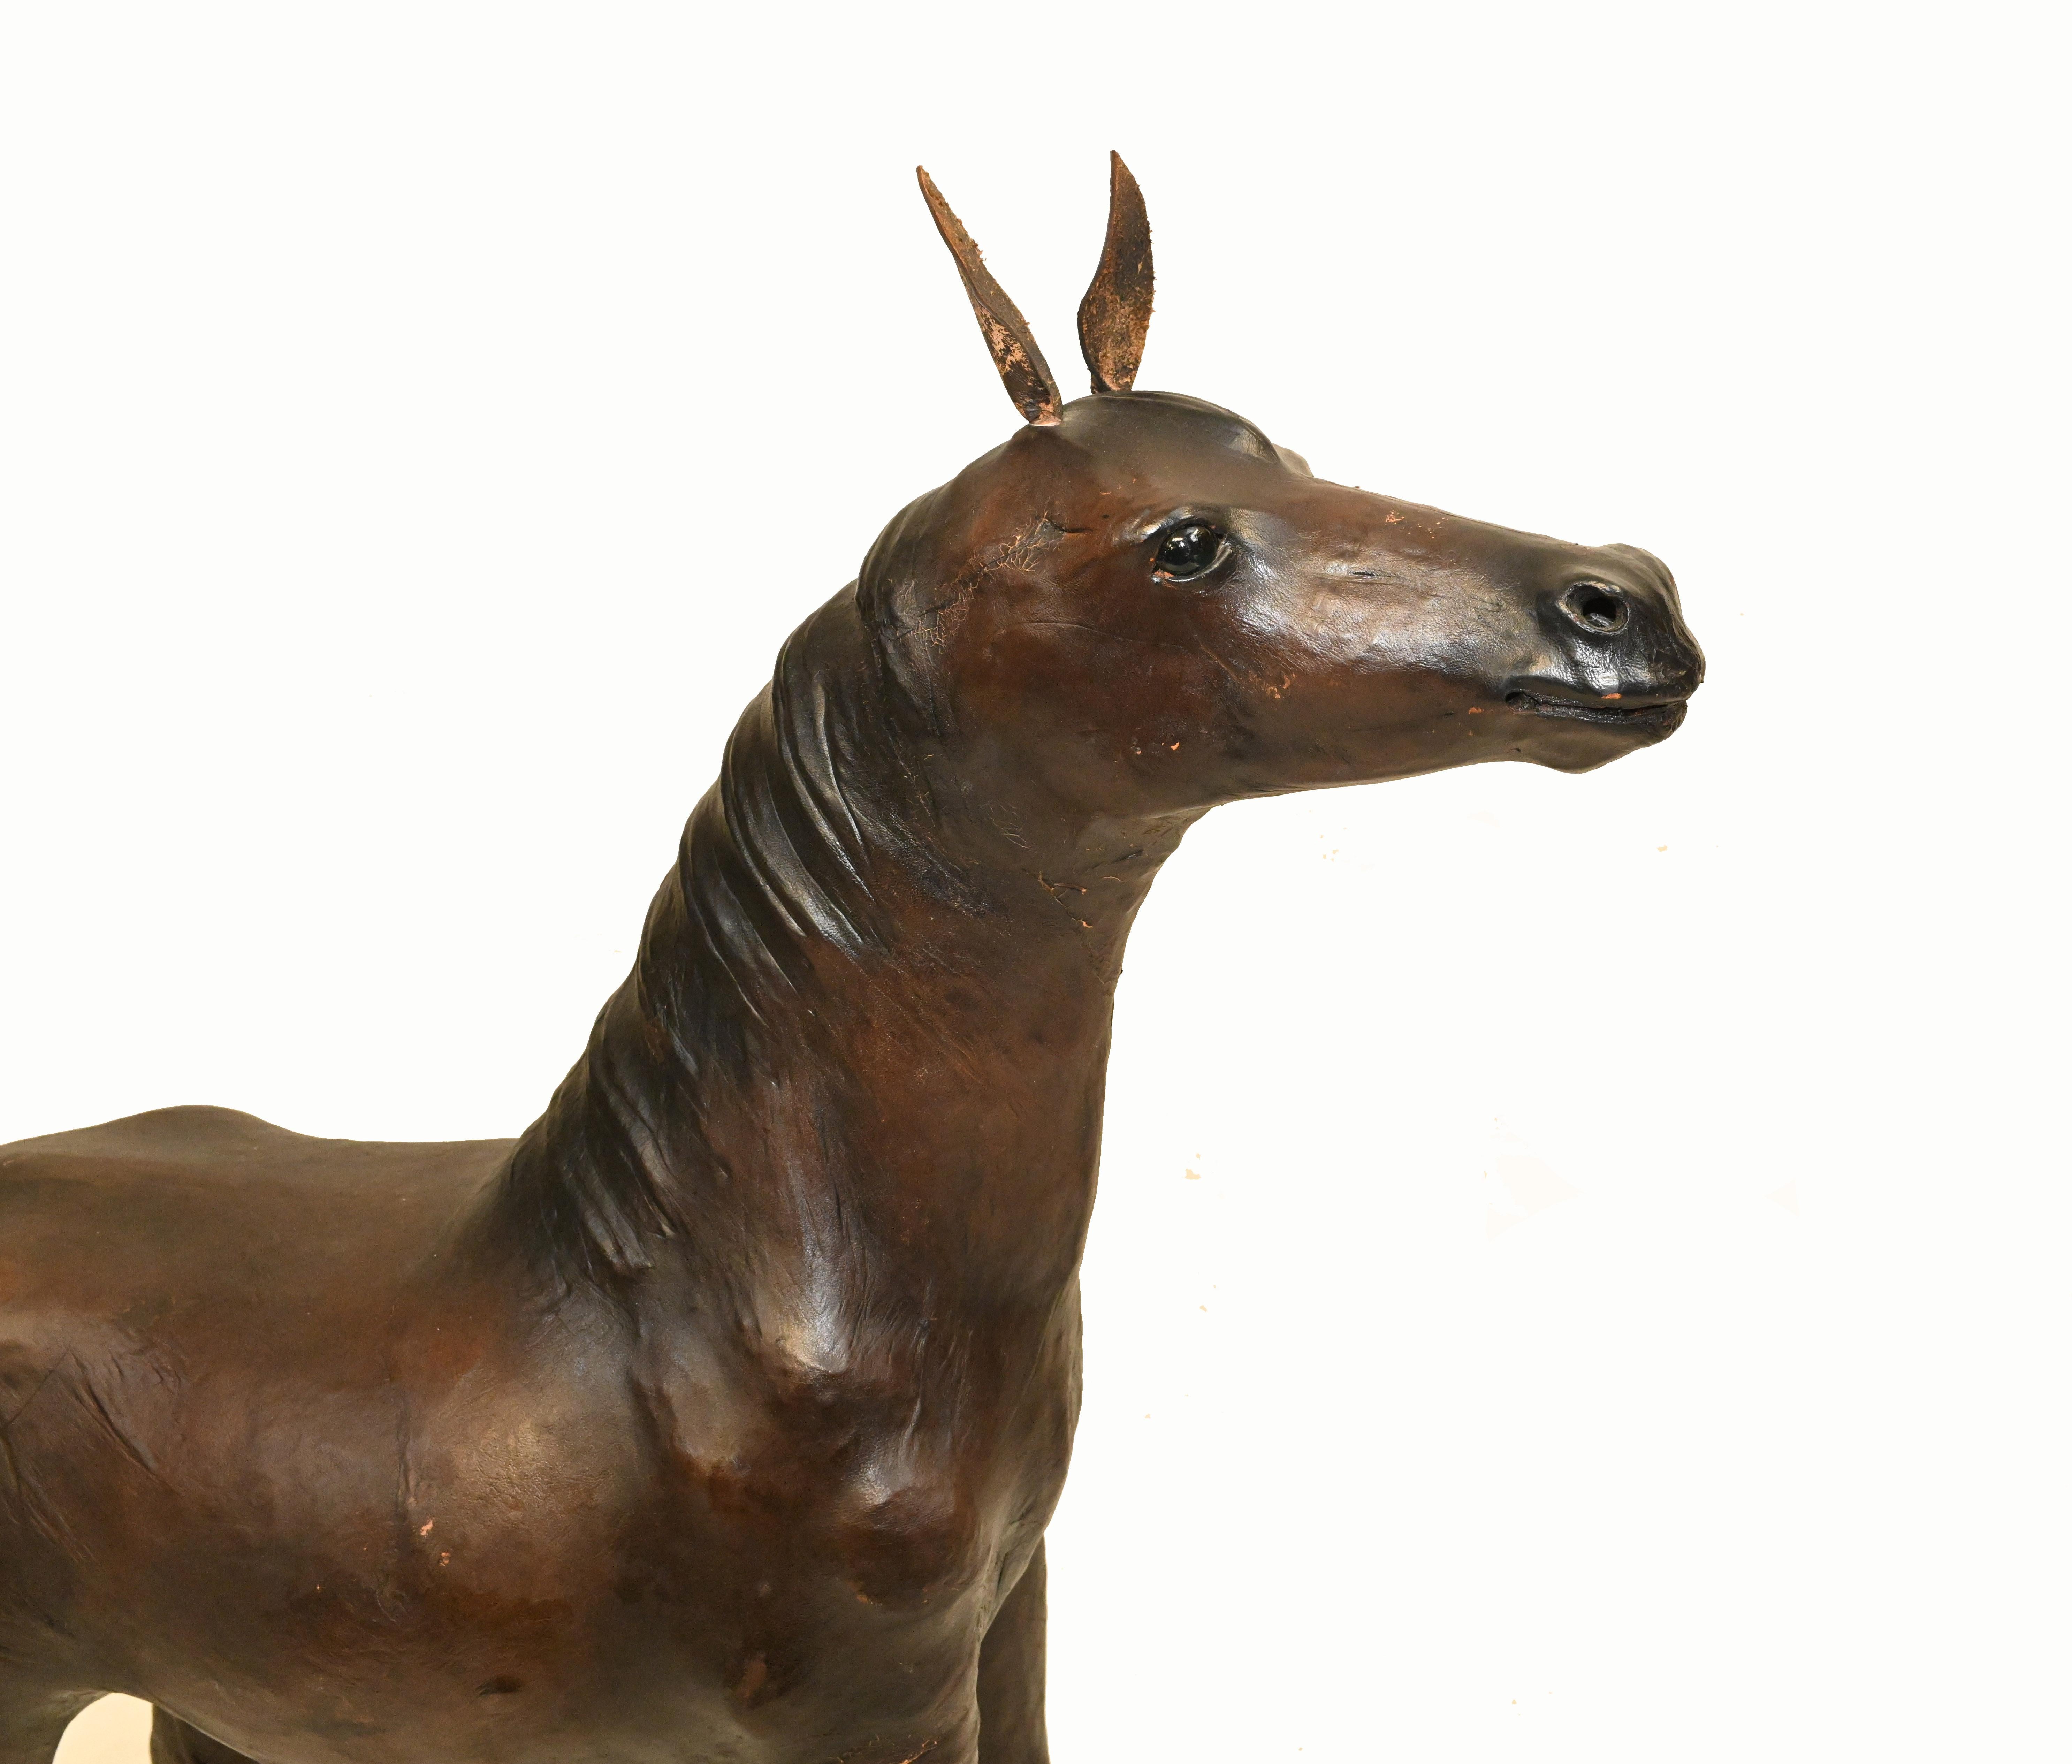 Collectable leather horse by Liberties of London
Great interiors piece offered in great shape
Good size at almost four feet tall - 111 CM
Viewing by appointment
Offered in great shape ready for home use right away
We ship to every corner of the